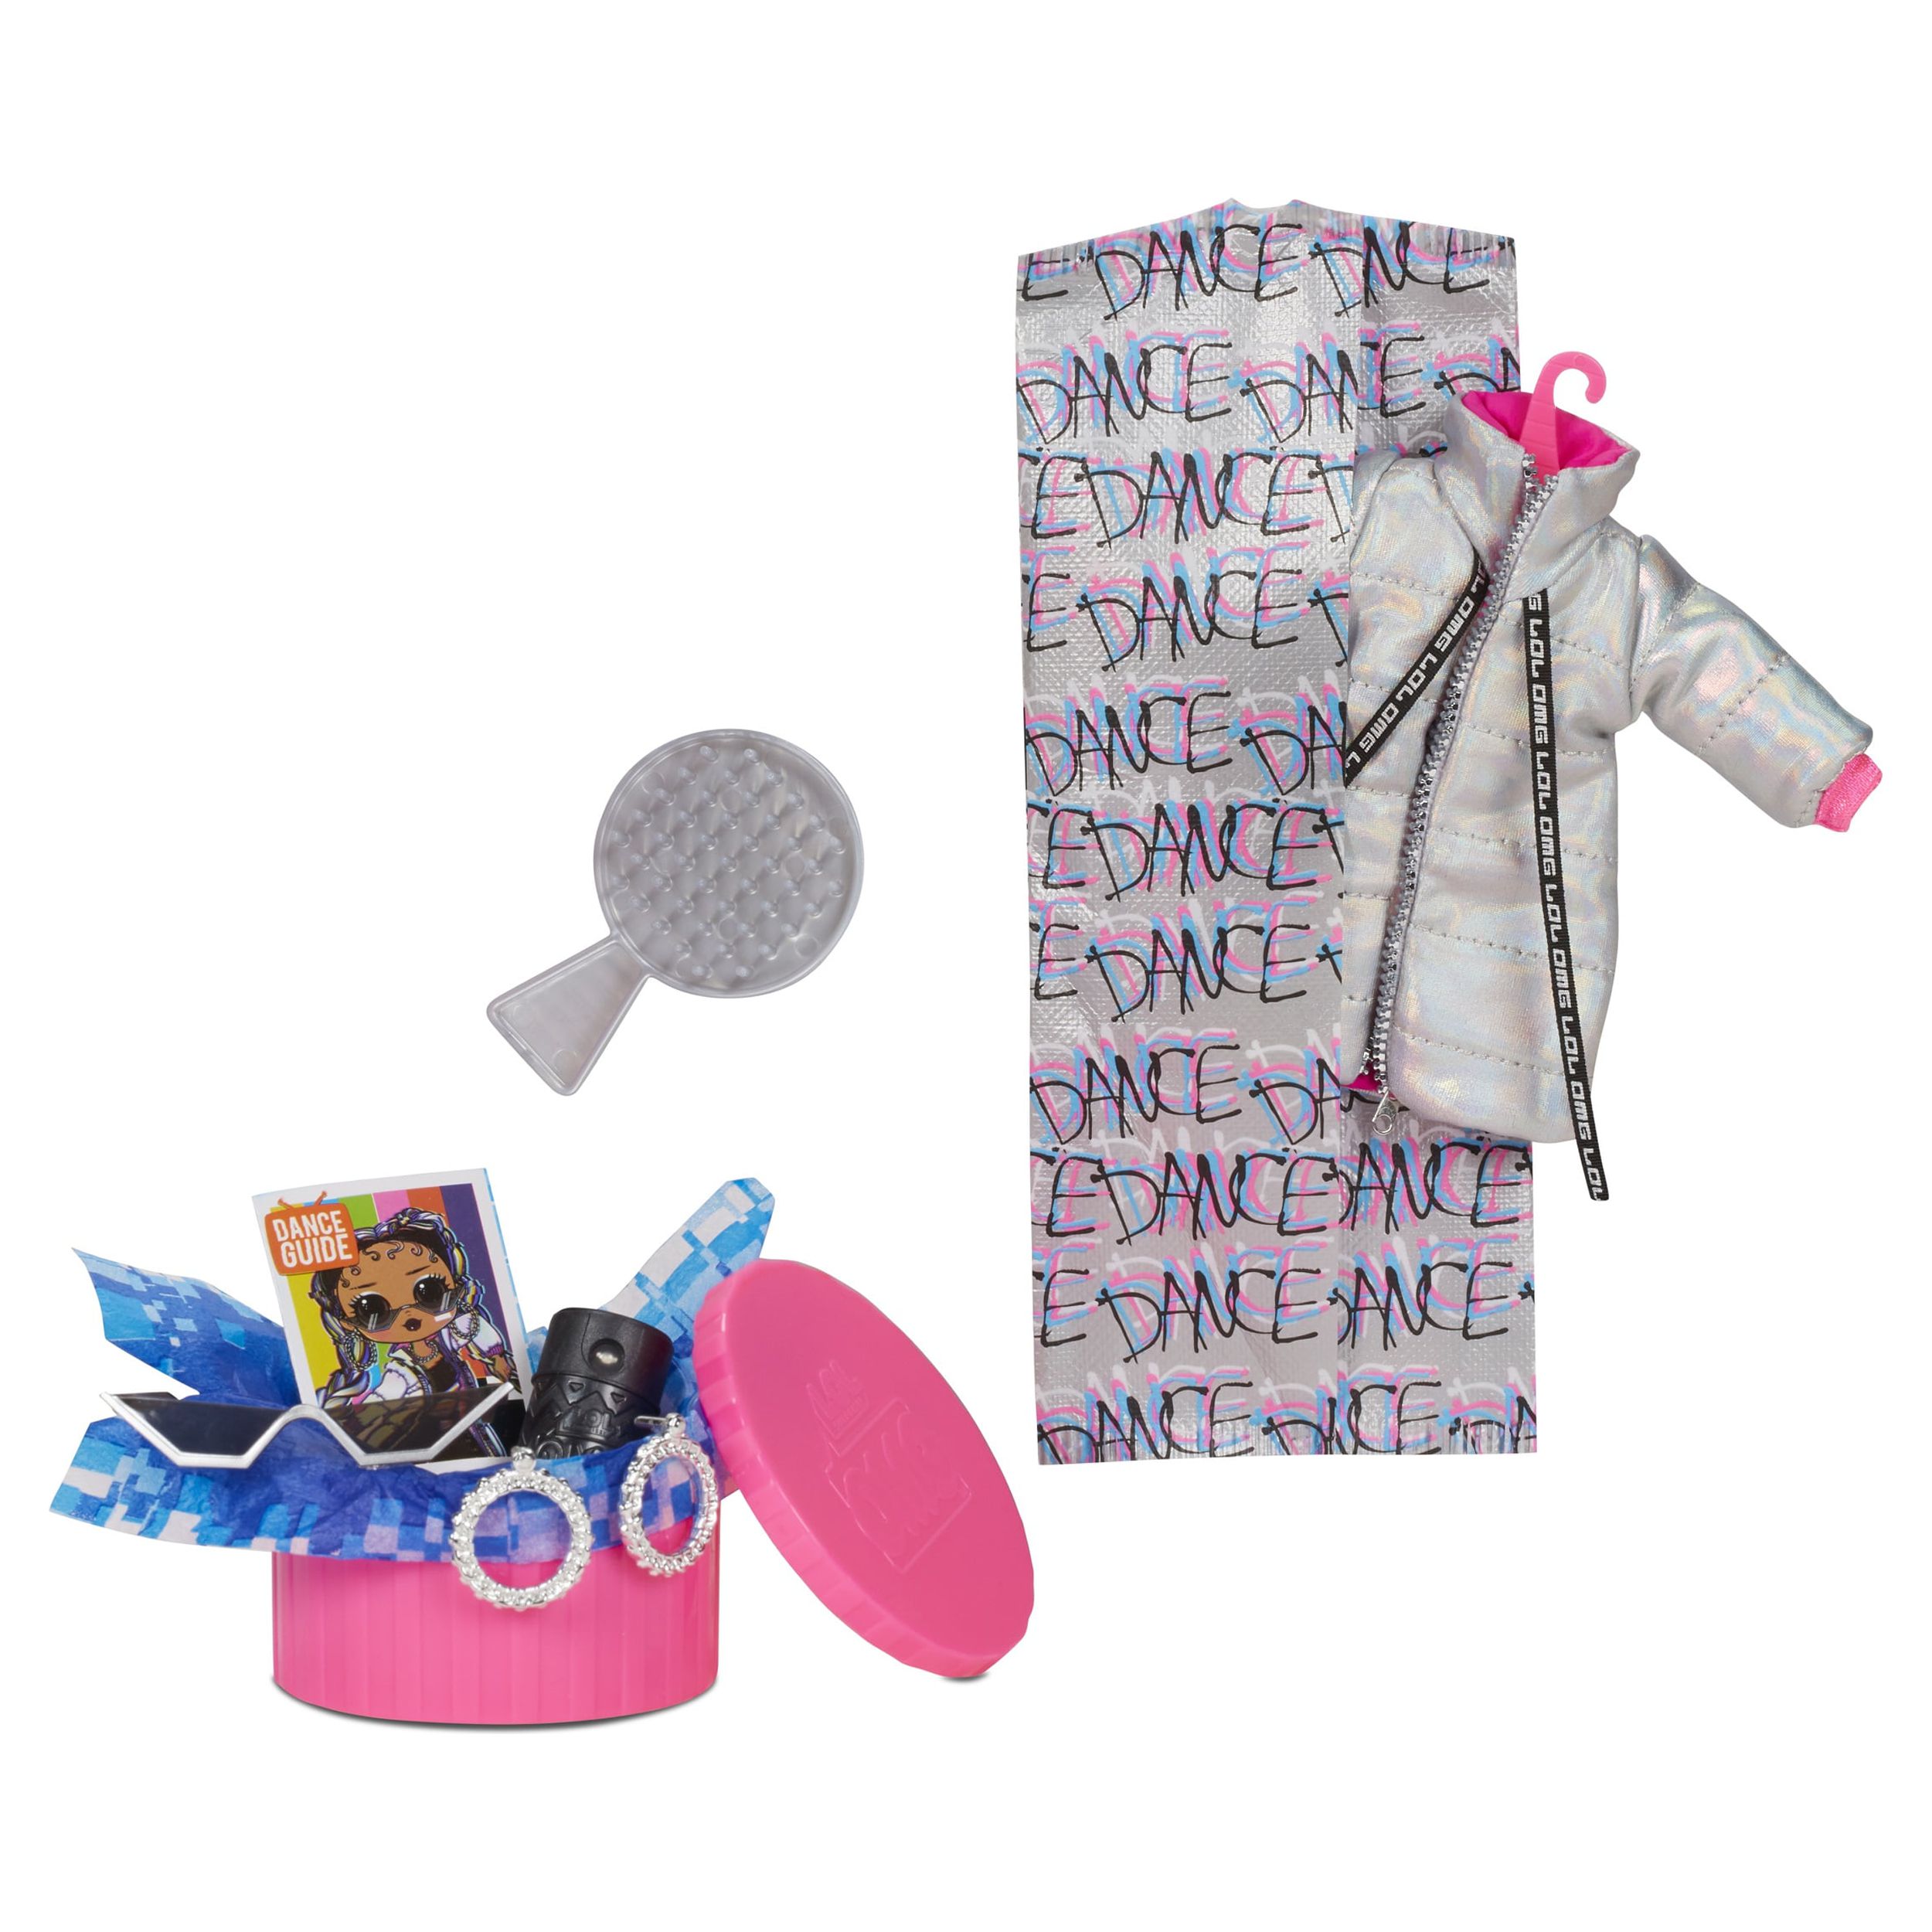 LOL Surprise OMG Dance Dance Dance B-Gurl Fashion Doll With 15 Surprises Including Magic Blacklight, Shoes, Hair Brush, Doll Stand and TV Package - For Girls Ages 4+ - image 3 of 7